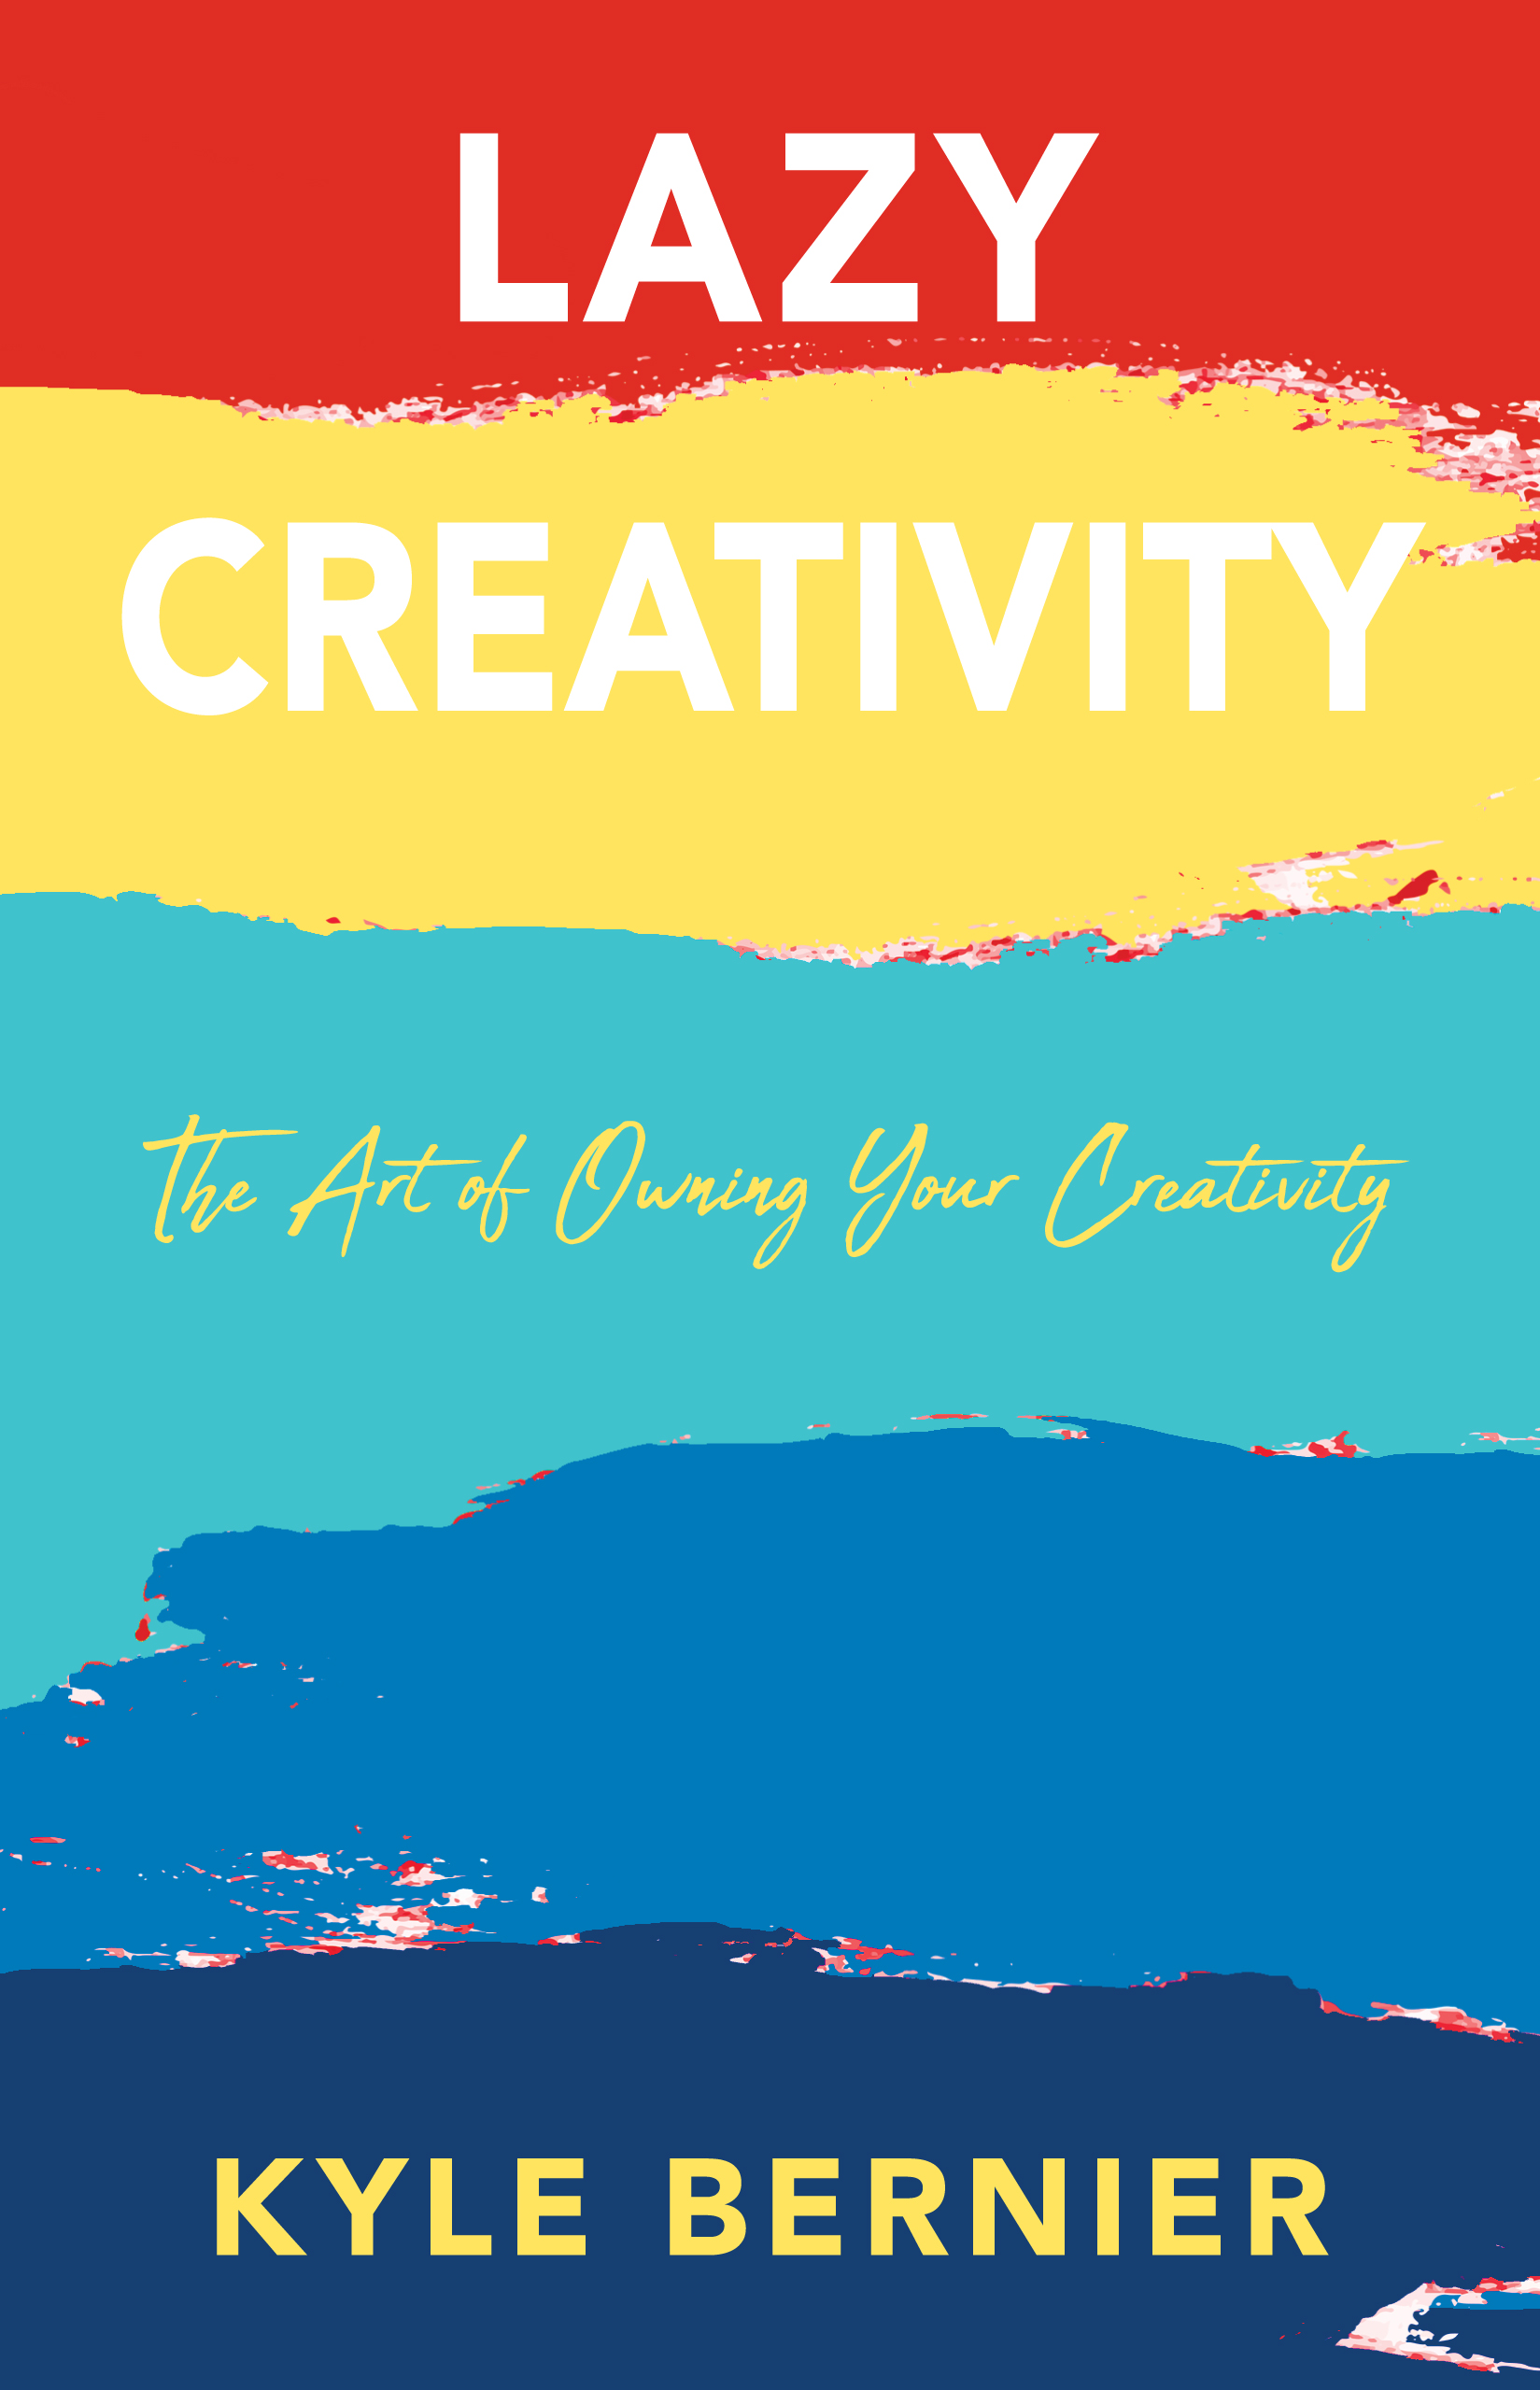 FREE: Lazy Creativity: The Art of Owning your Creativity by Kyle Bernier